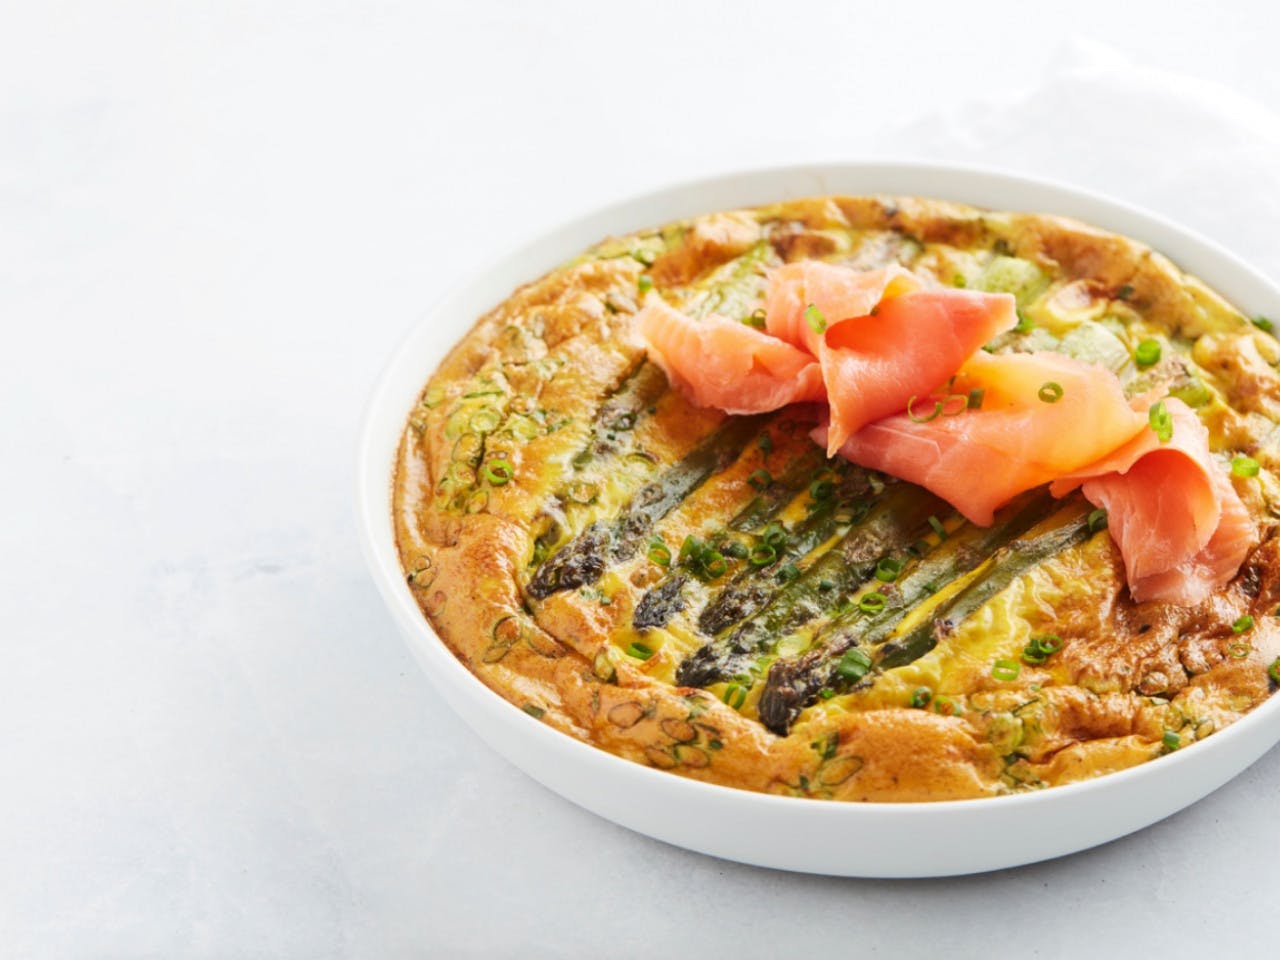 Quiche with smoked salmon and asparagus